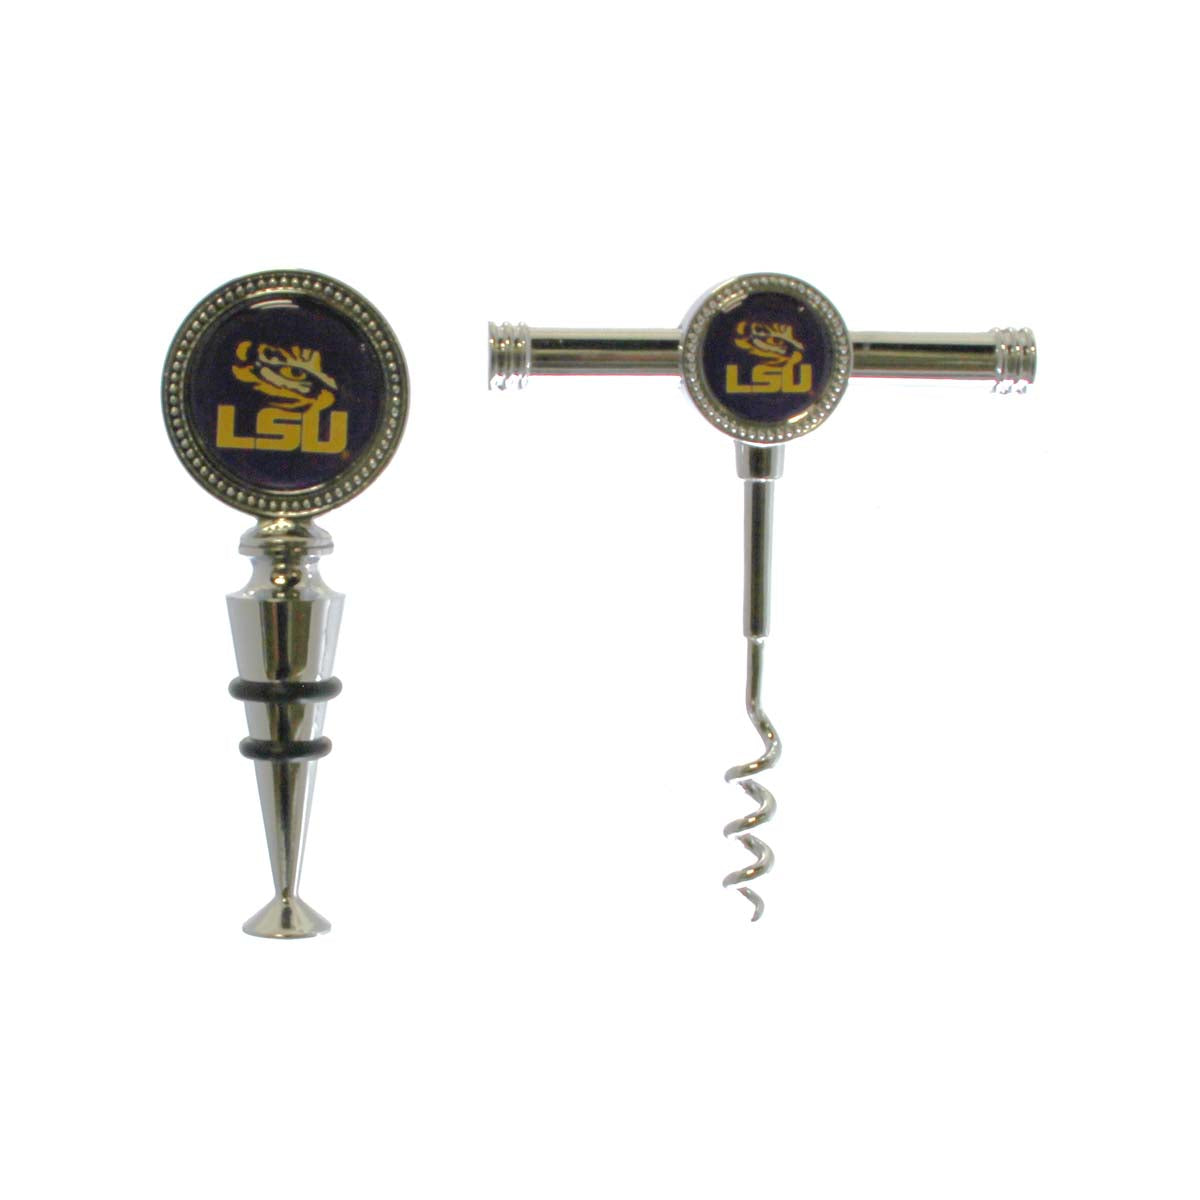 LSU Corkscrew and Bottle Stopper Boxed Set